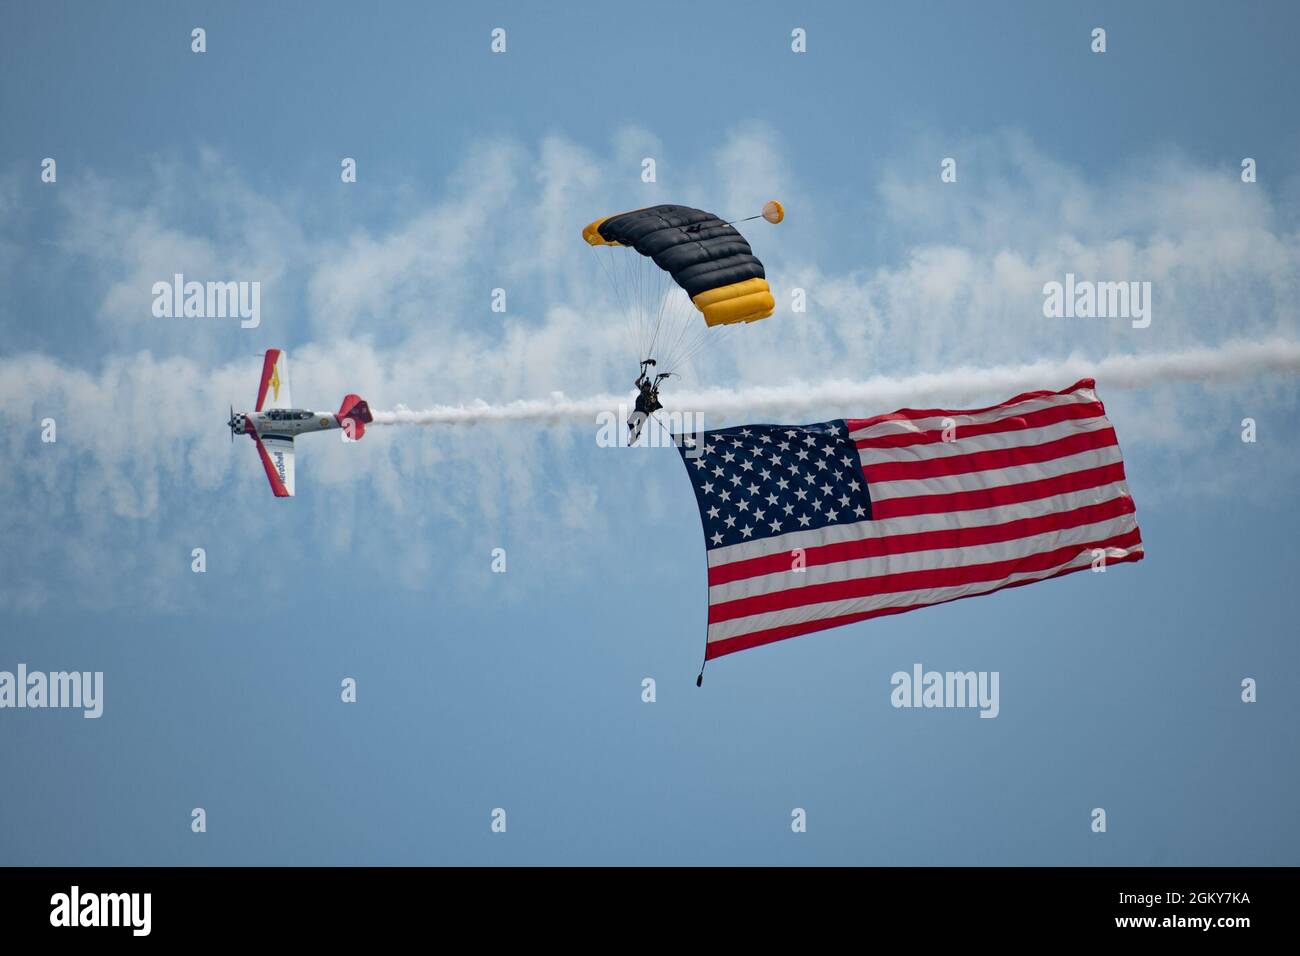 A U.S. Special Operations Command Parachute Team Para-Commando and an Aeroshell Acrobatic Team AT-6 Texan aircraft perform during EAA AirVenture Oshkosh 21, at Oshkosh, Wis., July 26, 2021. The airshow featured various civilian and military aircraft, to include the Warbirds of America, Aeroshell, SOCOM and Air Force Special Operations Command. The Para-Commandos are comprised of active duty Special Operators, such as Army Special Forces, Army Rangers, Navy SEALs, Air Force Combat Controllers and Marine Raiders. Stock Photo